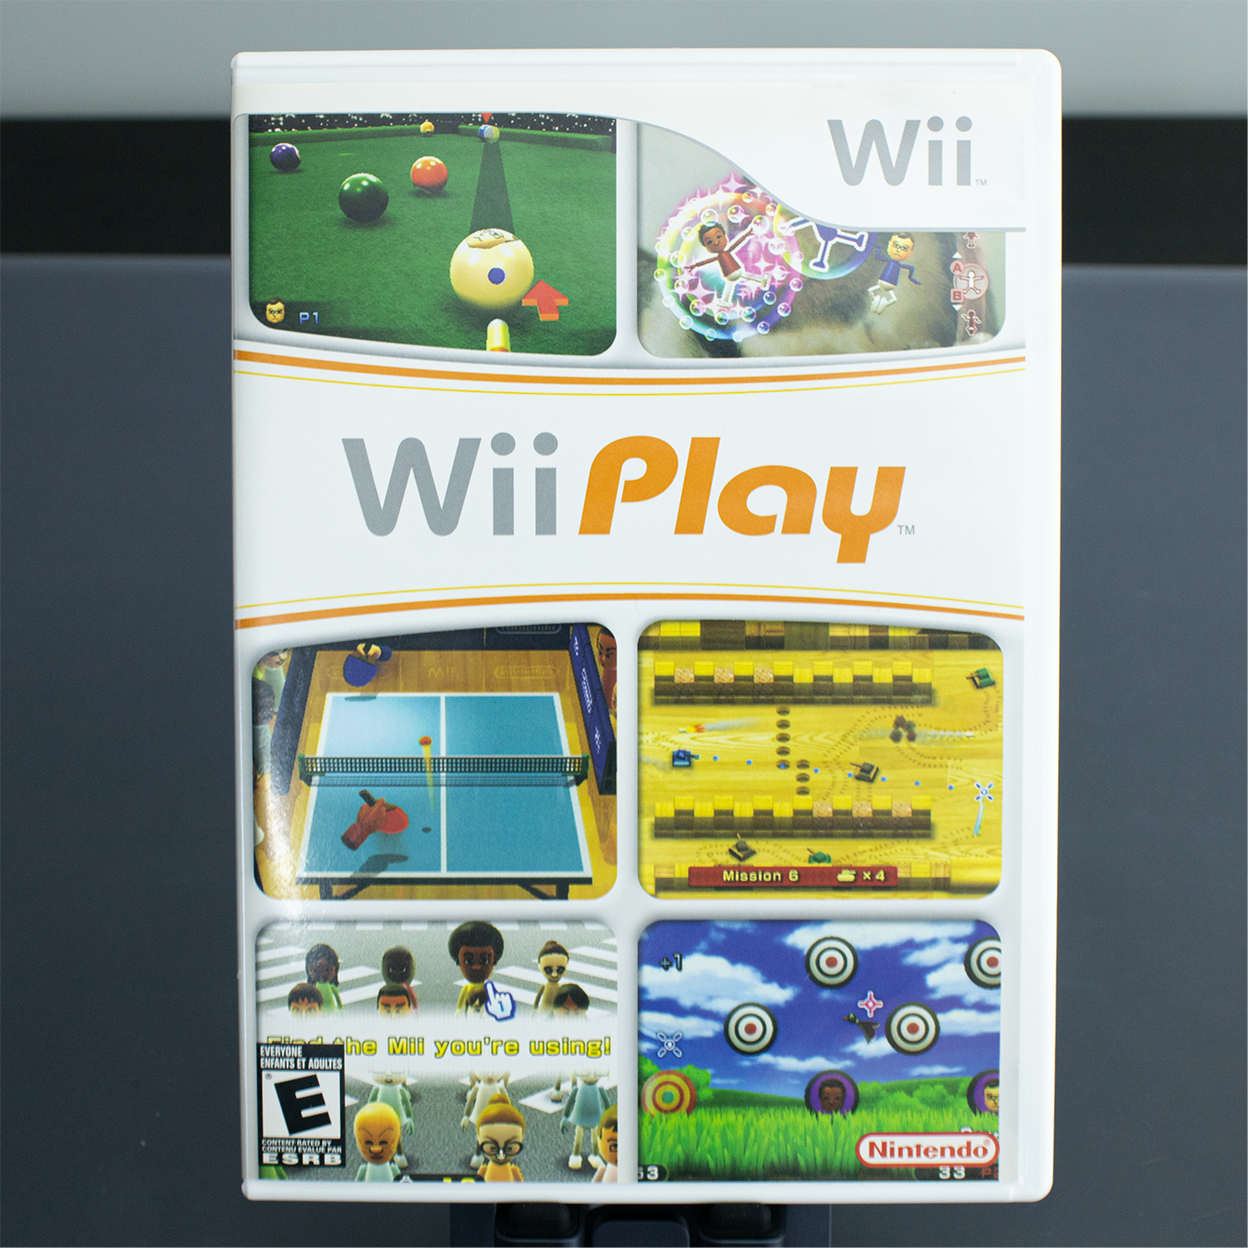 WiiPlay - Wii Game